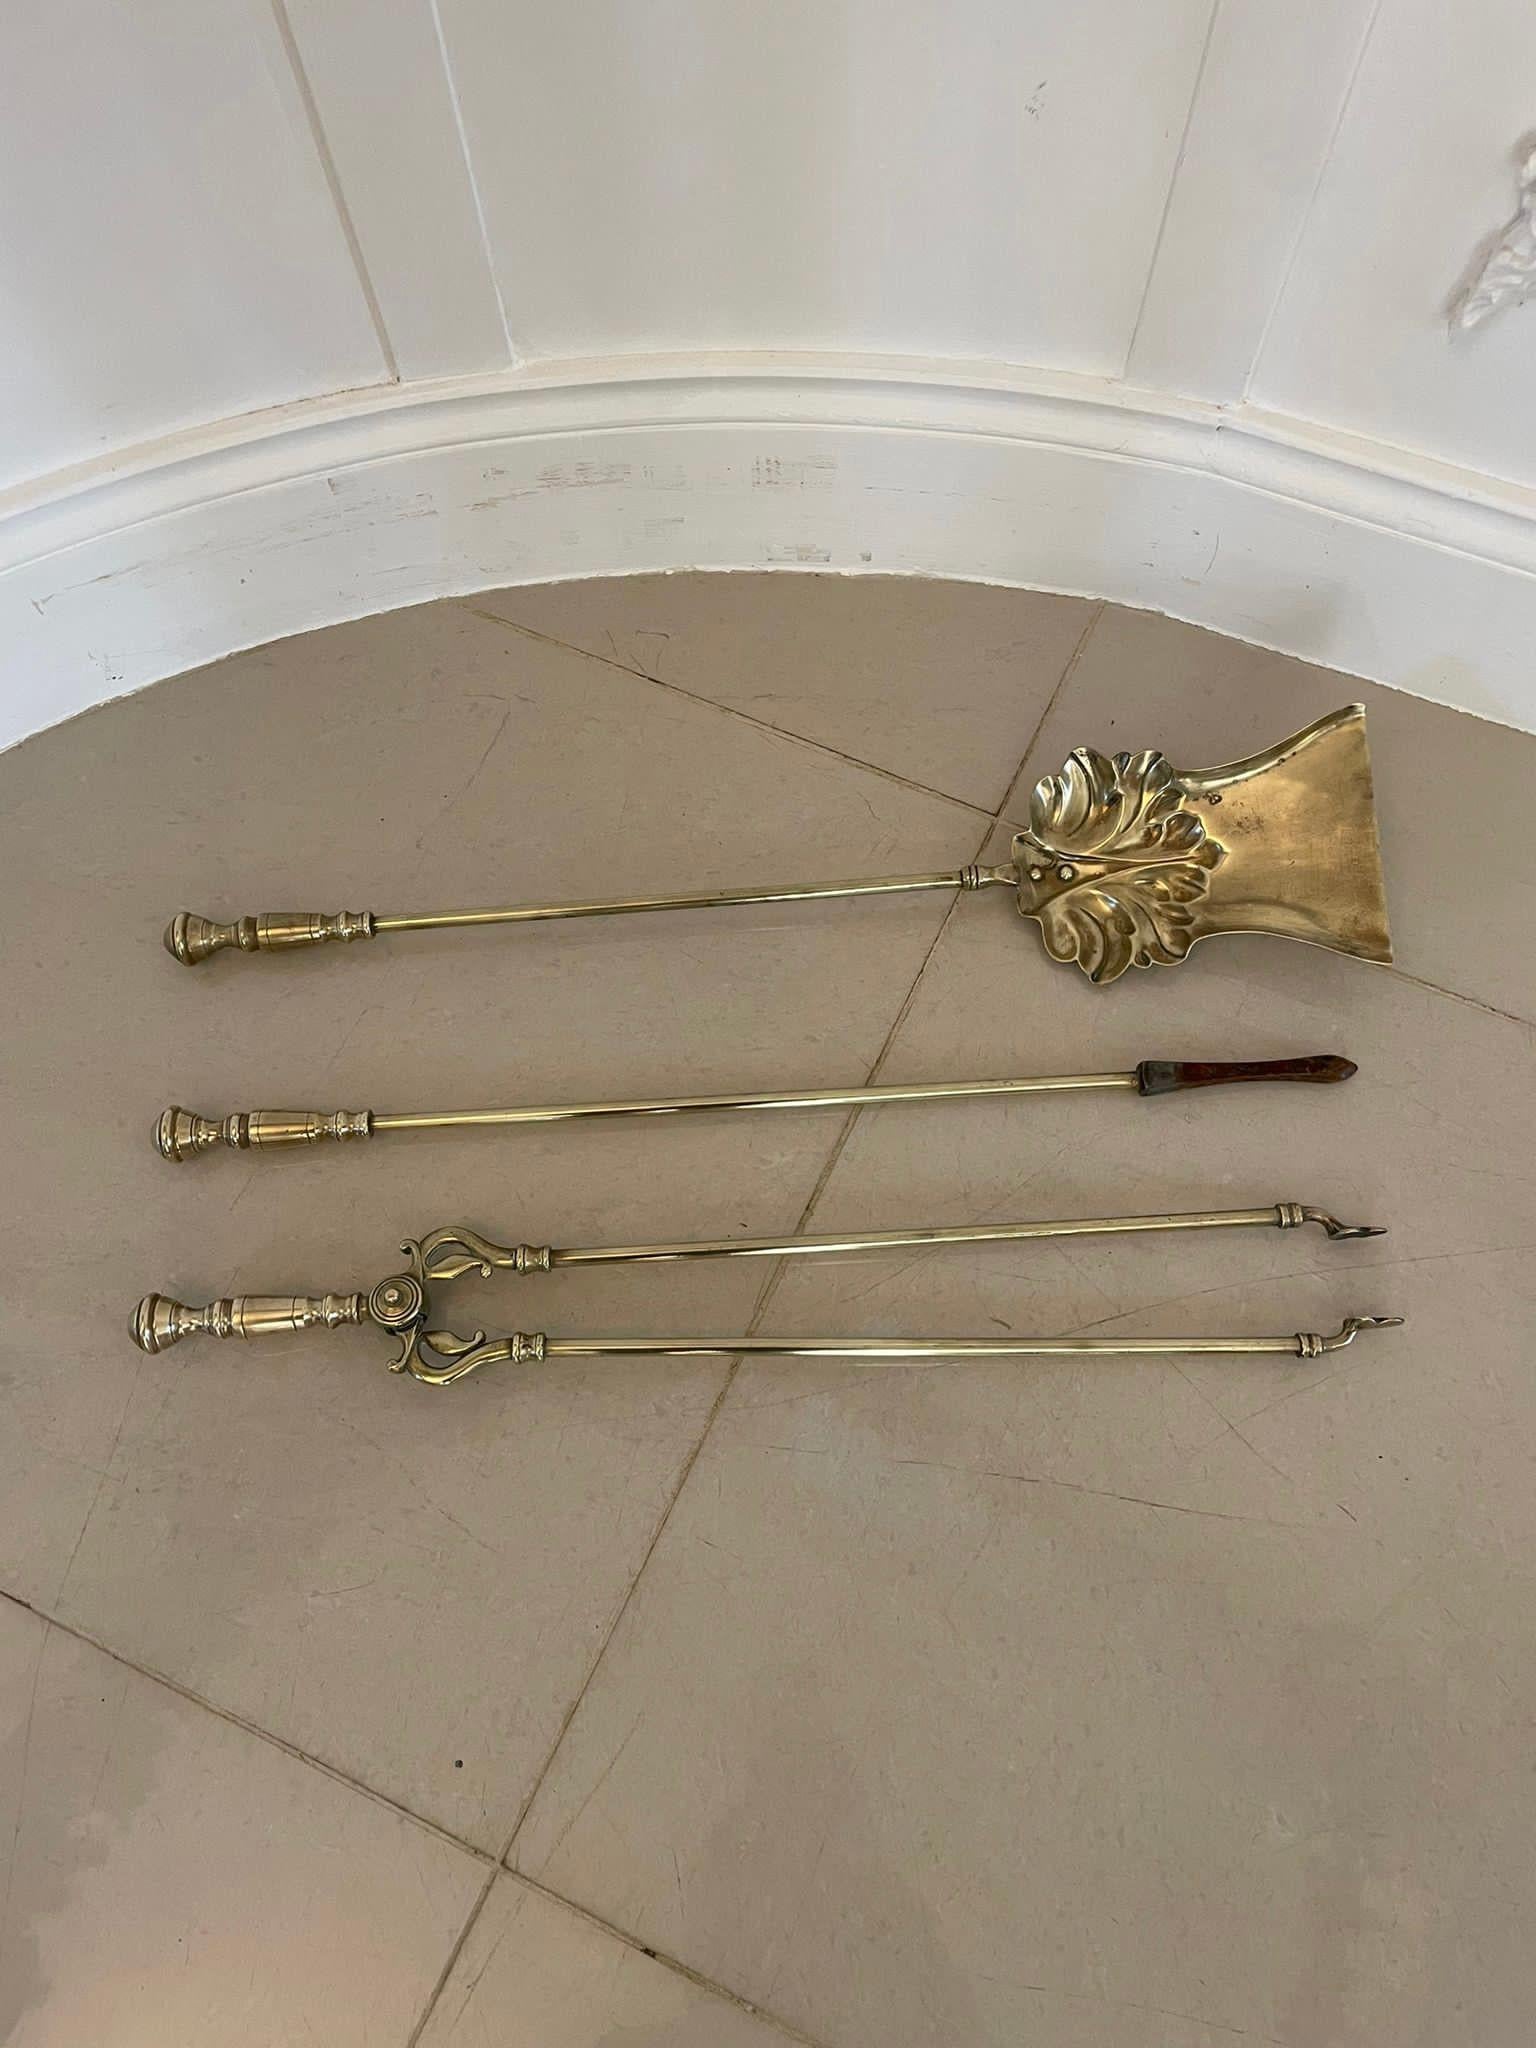 
Antique Victorian quality brass set of 3 fire irons consisting of an ornate shovel, poker and fire tongs 

H 67 x W 14 x D 2cm
Date 1860
